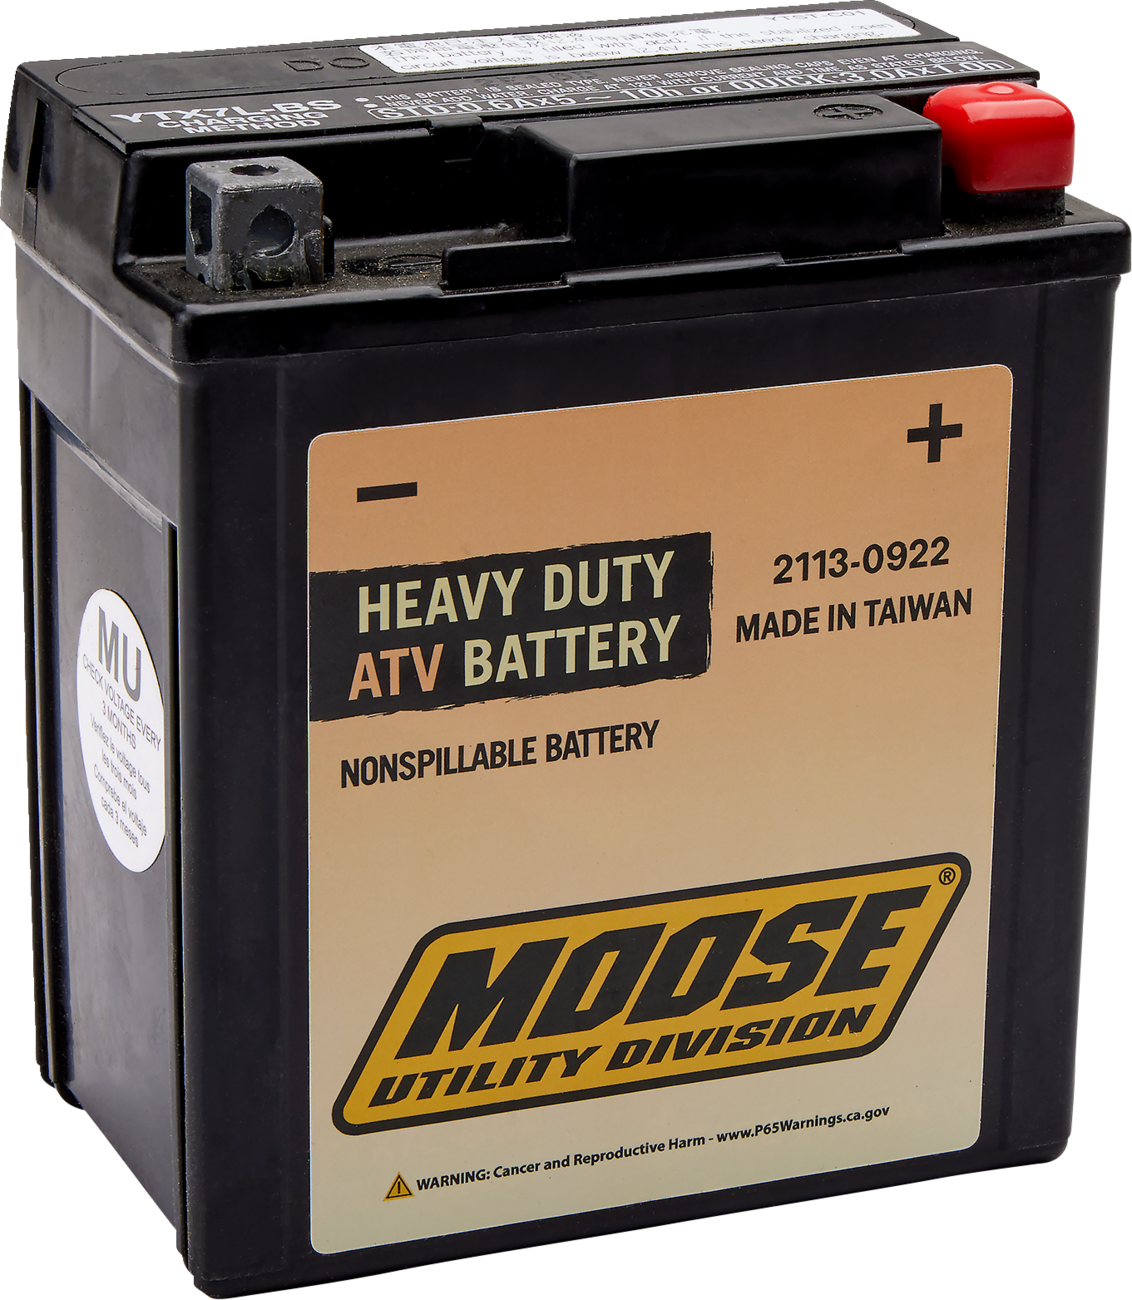 MOOSE UTILITY Factory-Activated AGM Maintenance-Free Battery